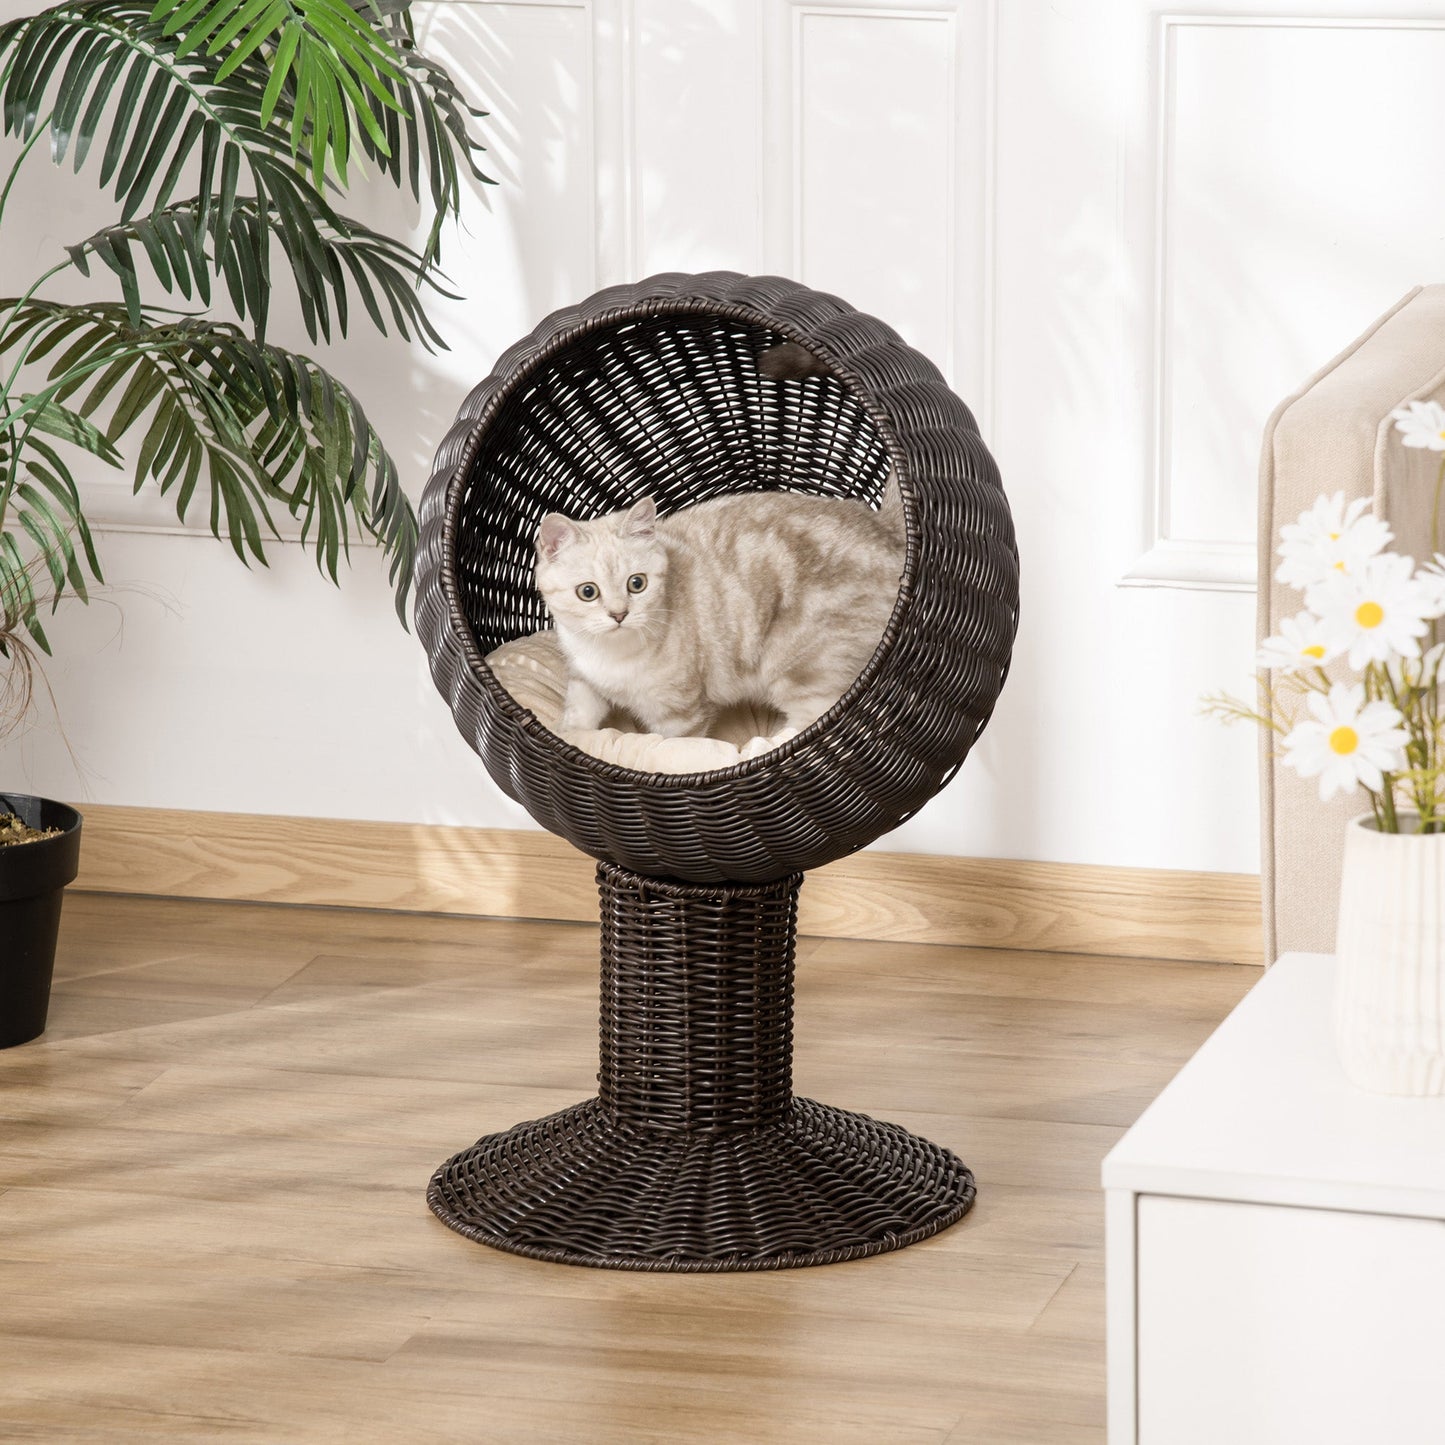 -PawHut 27" Hooded Wicker Raised Cat Bed Rattan Cat Condo Round with Cushion, Coffee - Outdoor Style Company